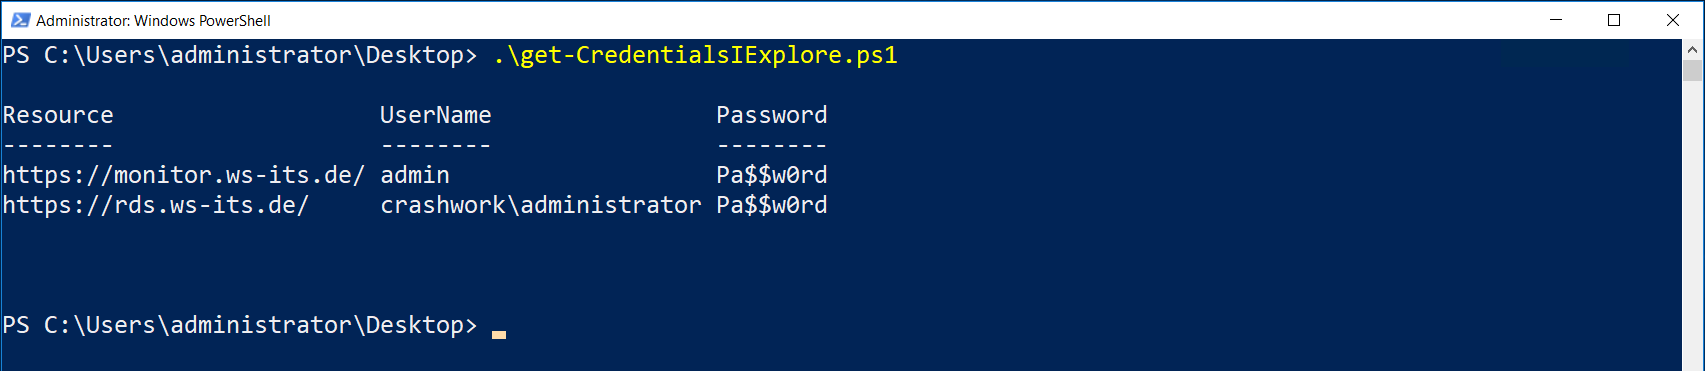 PS-Security &#8211; PowerShell Script Execution